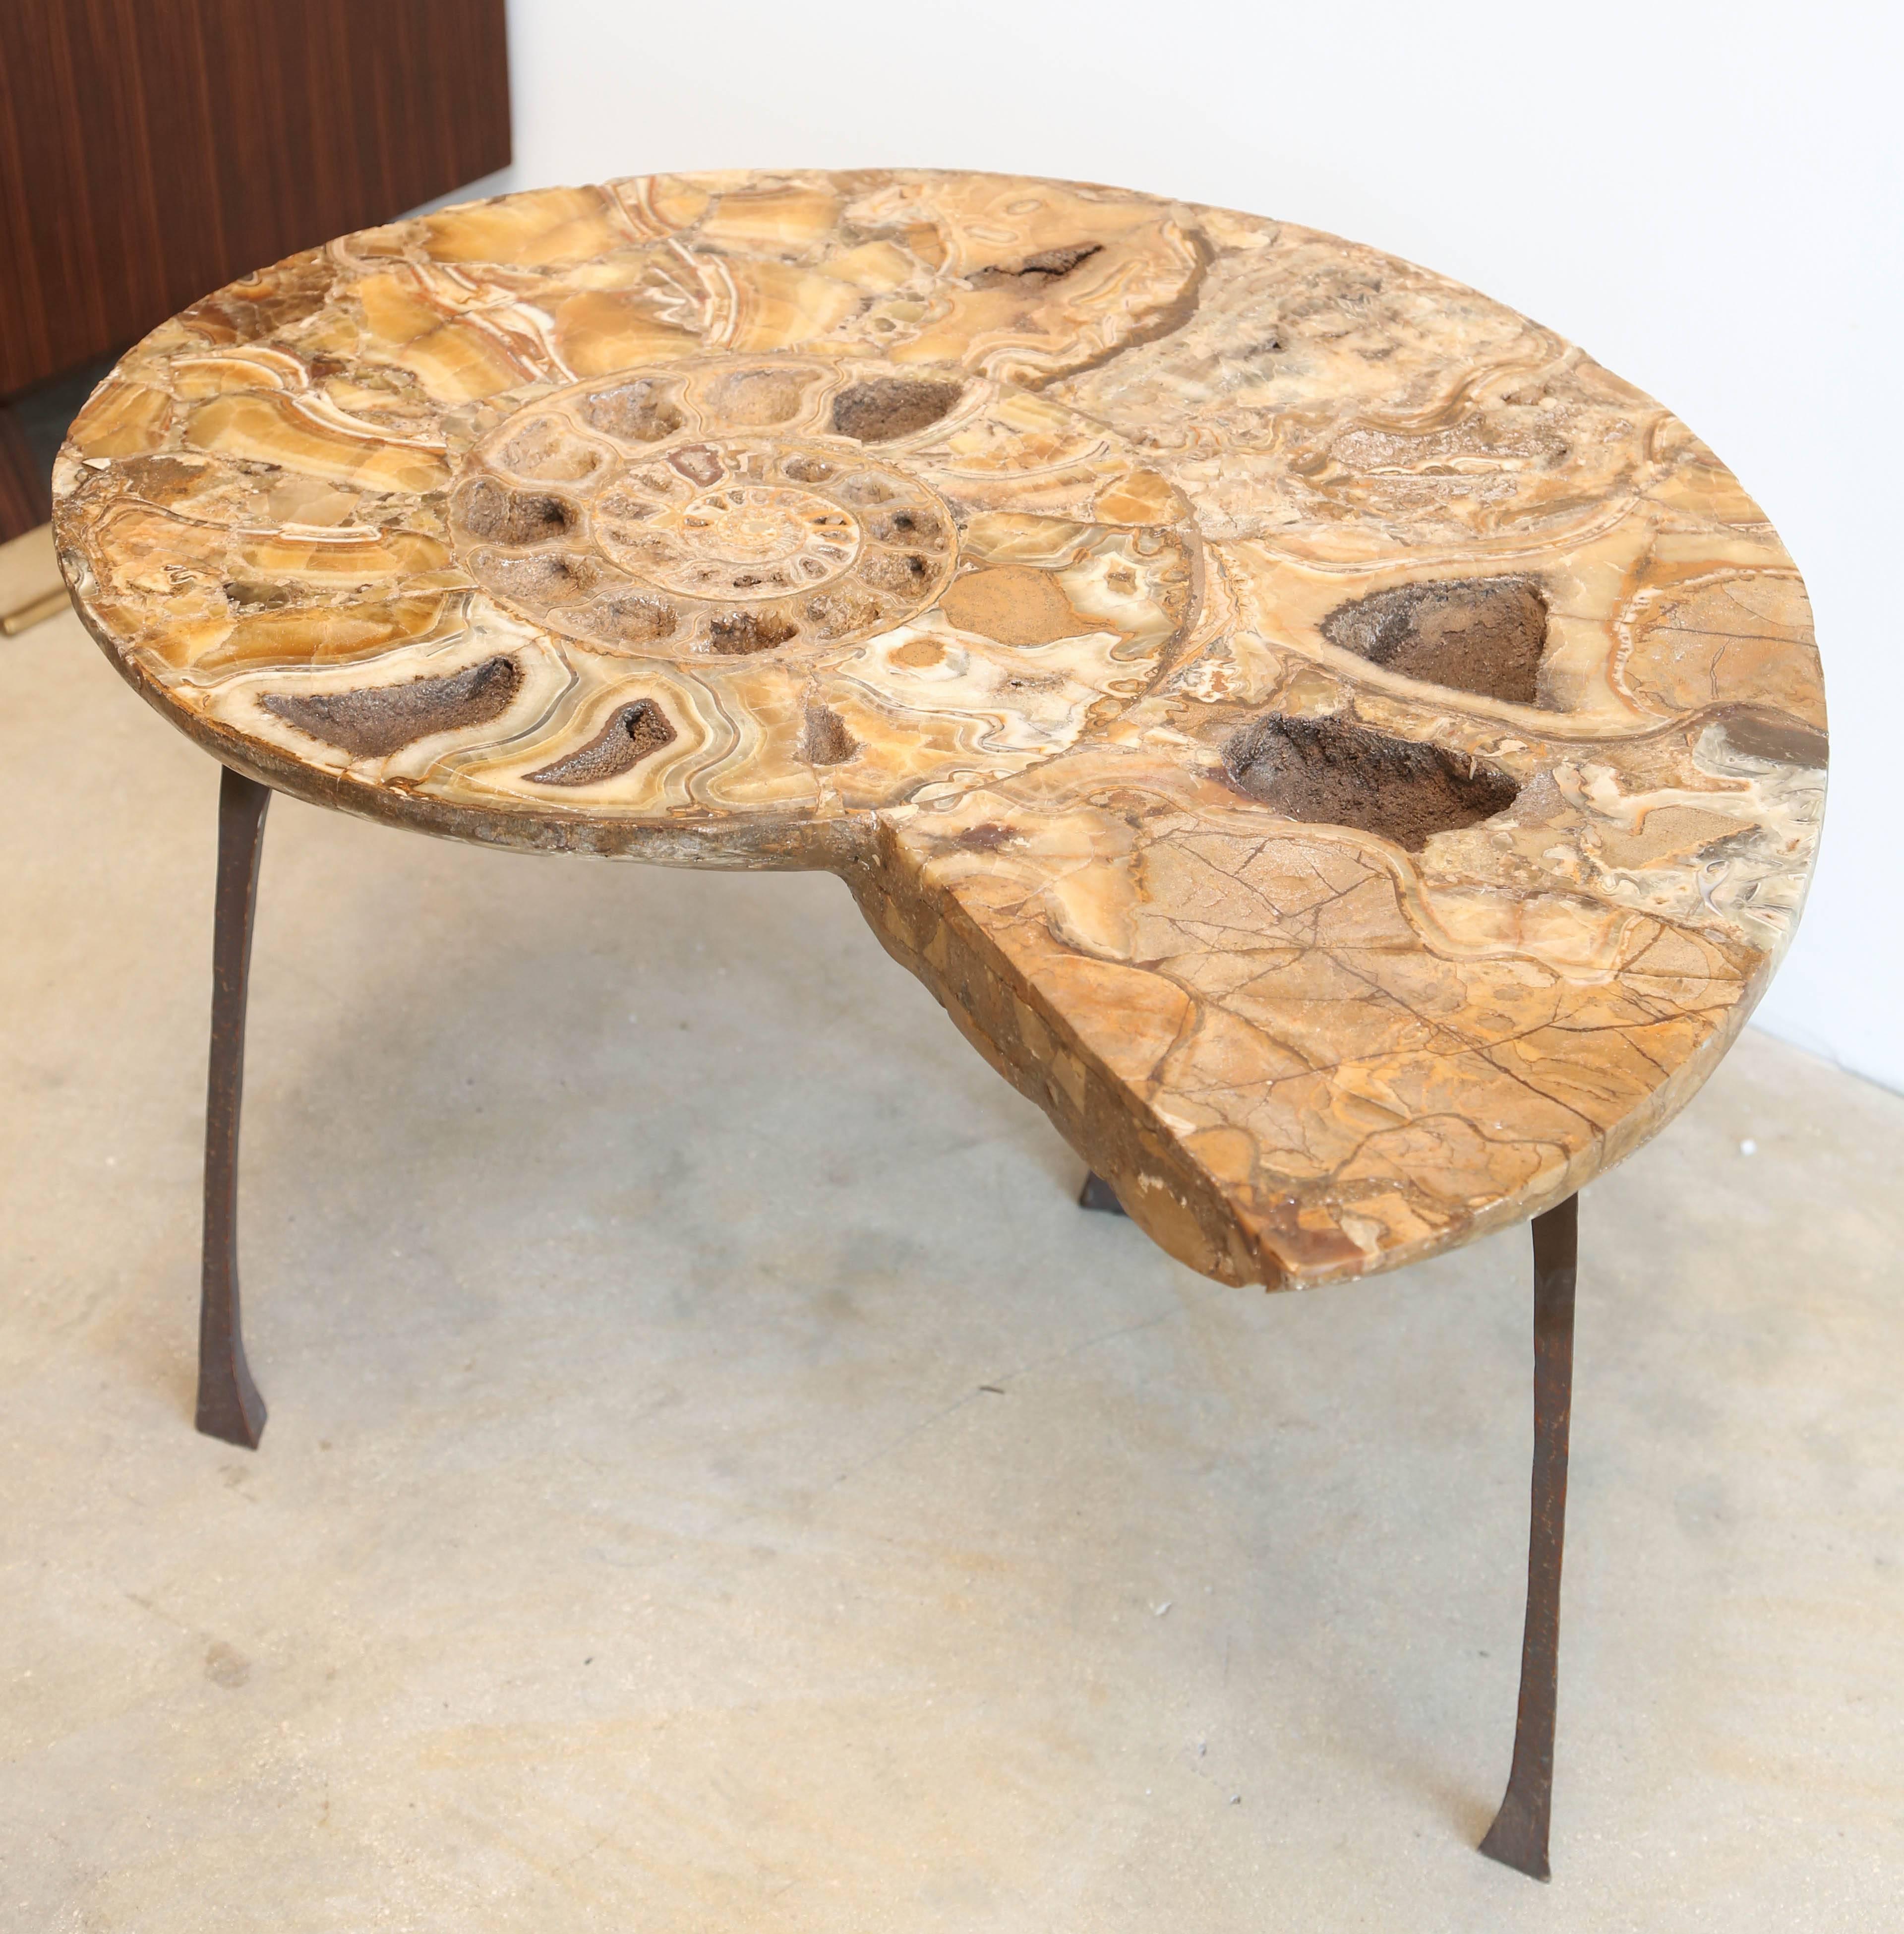 fossil table